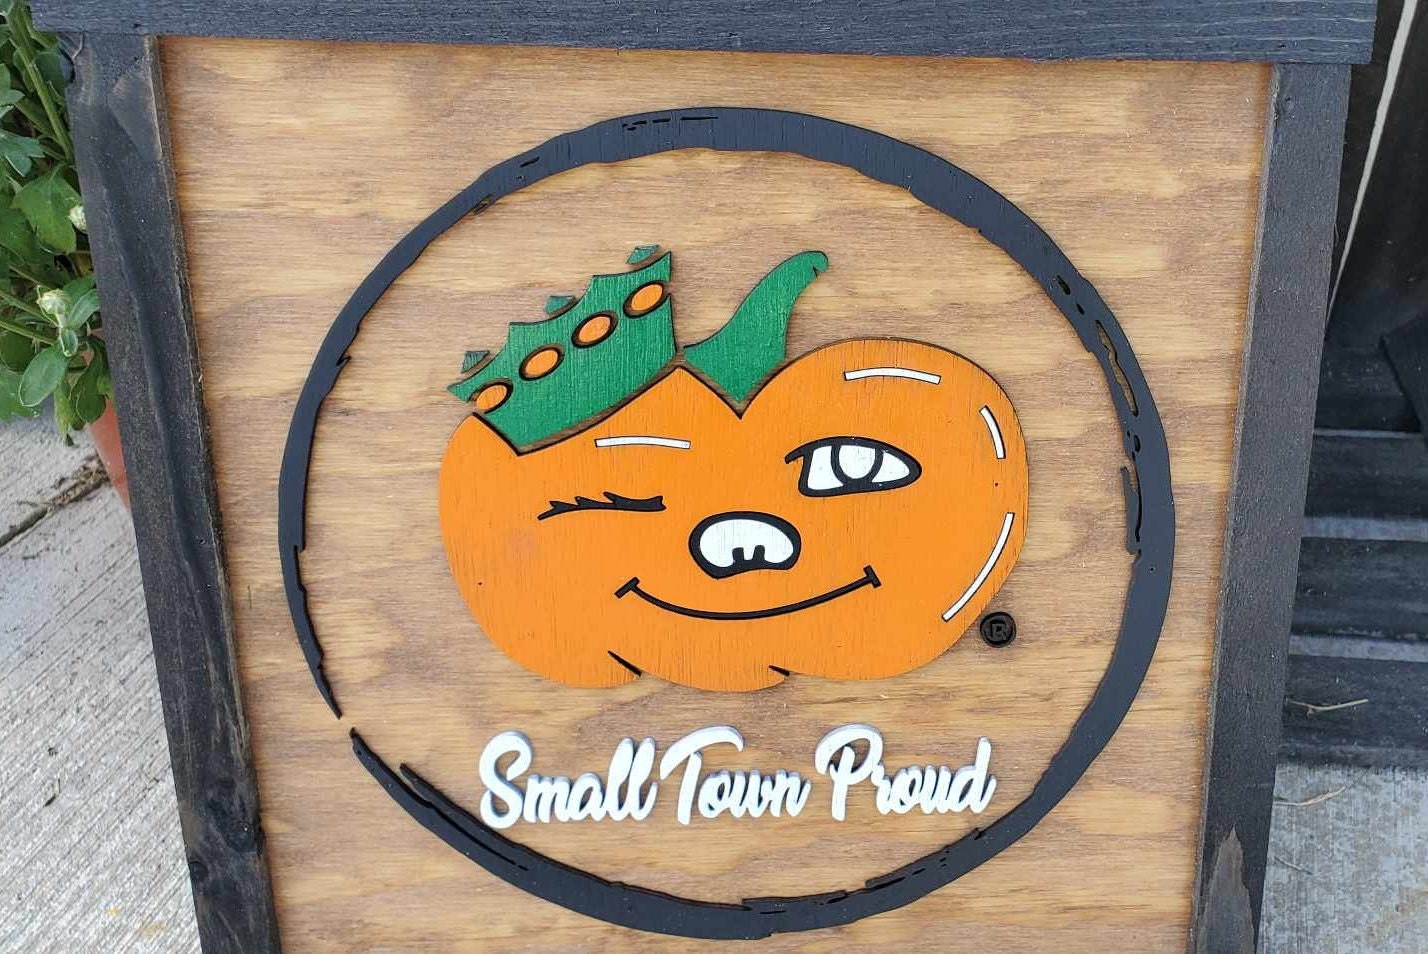 Small Town Proud Circleville Ohio Winky Square Wood 3D lettering Classic Rustic Halloween Fall Autumn Holiday Seasonal Cute Kitchen Home